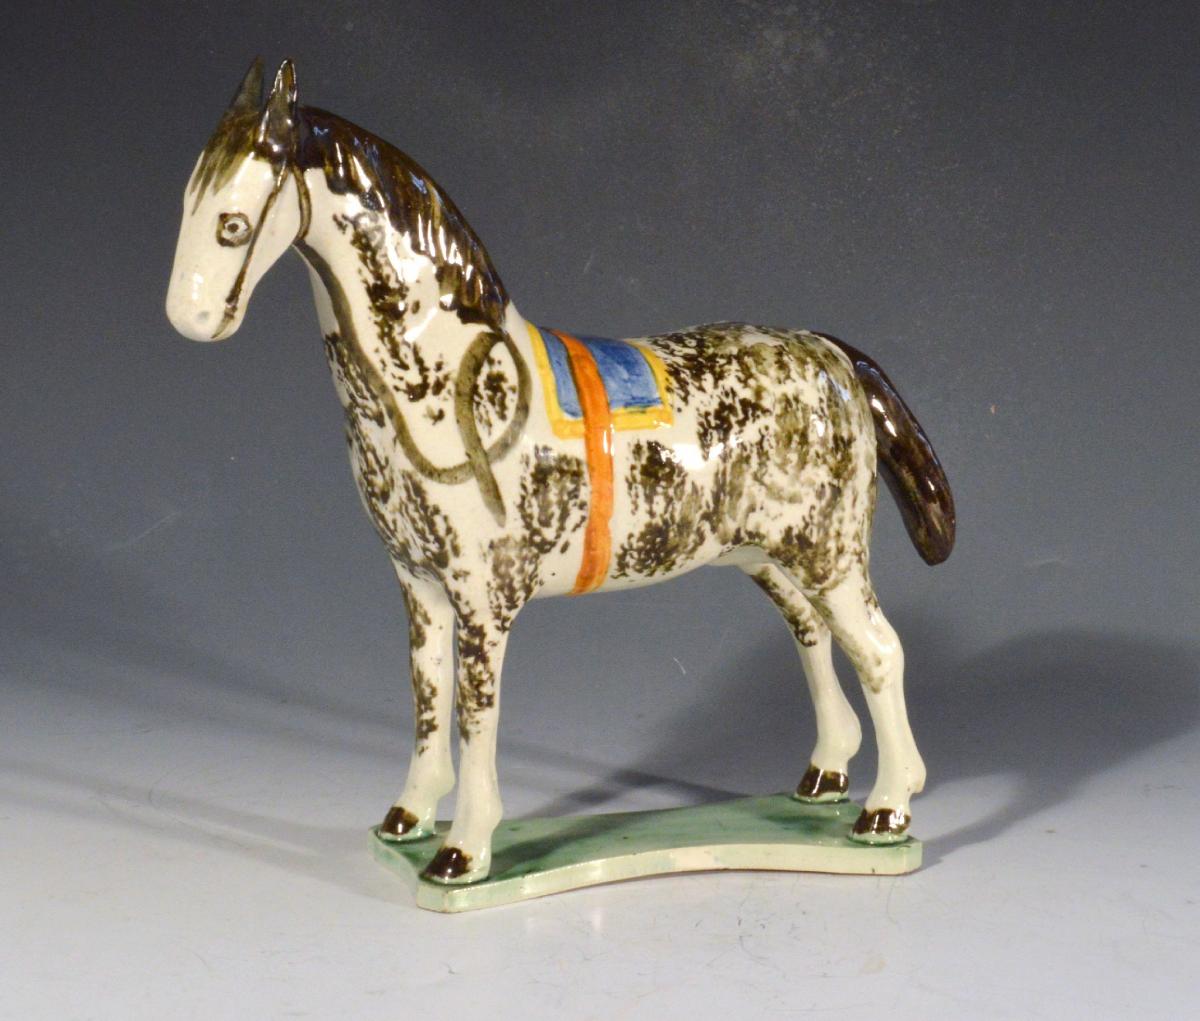 Newcastle Prattware Pottery Model of a Horse, Probably St. Anthony Pottery, Newcastle upon Tyne. Circa 1810-30